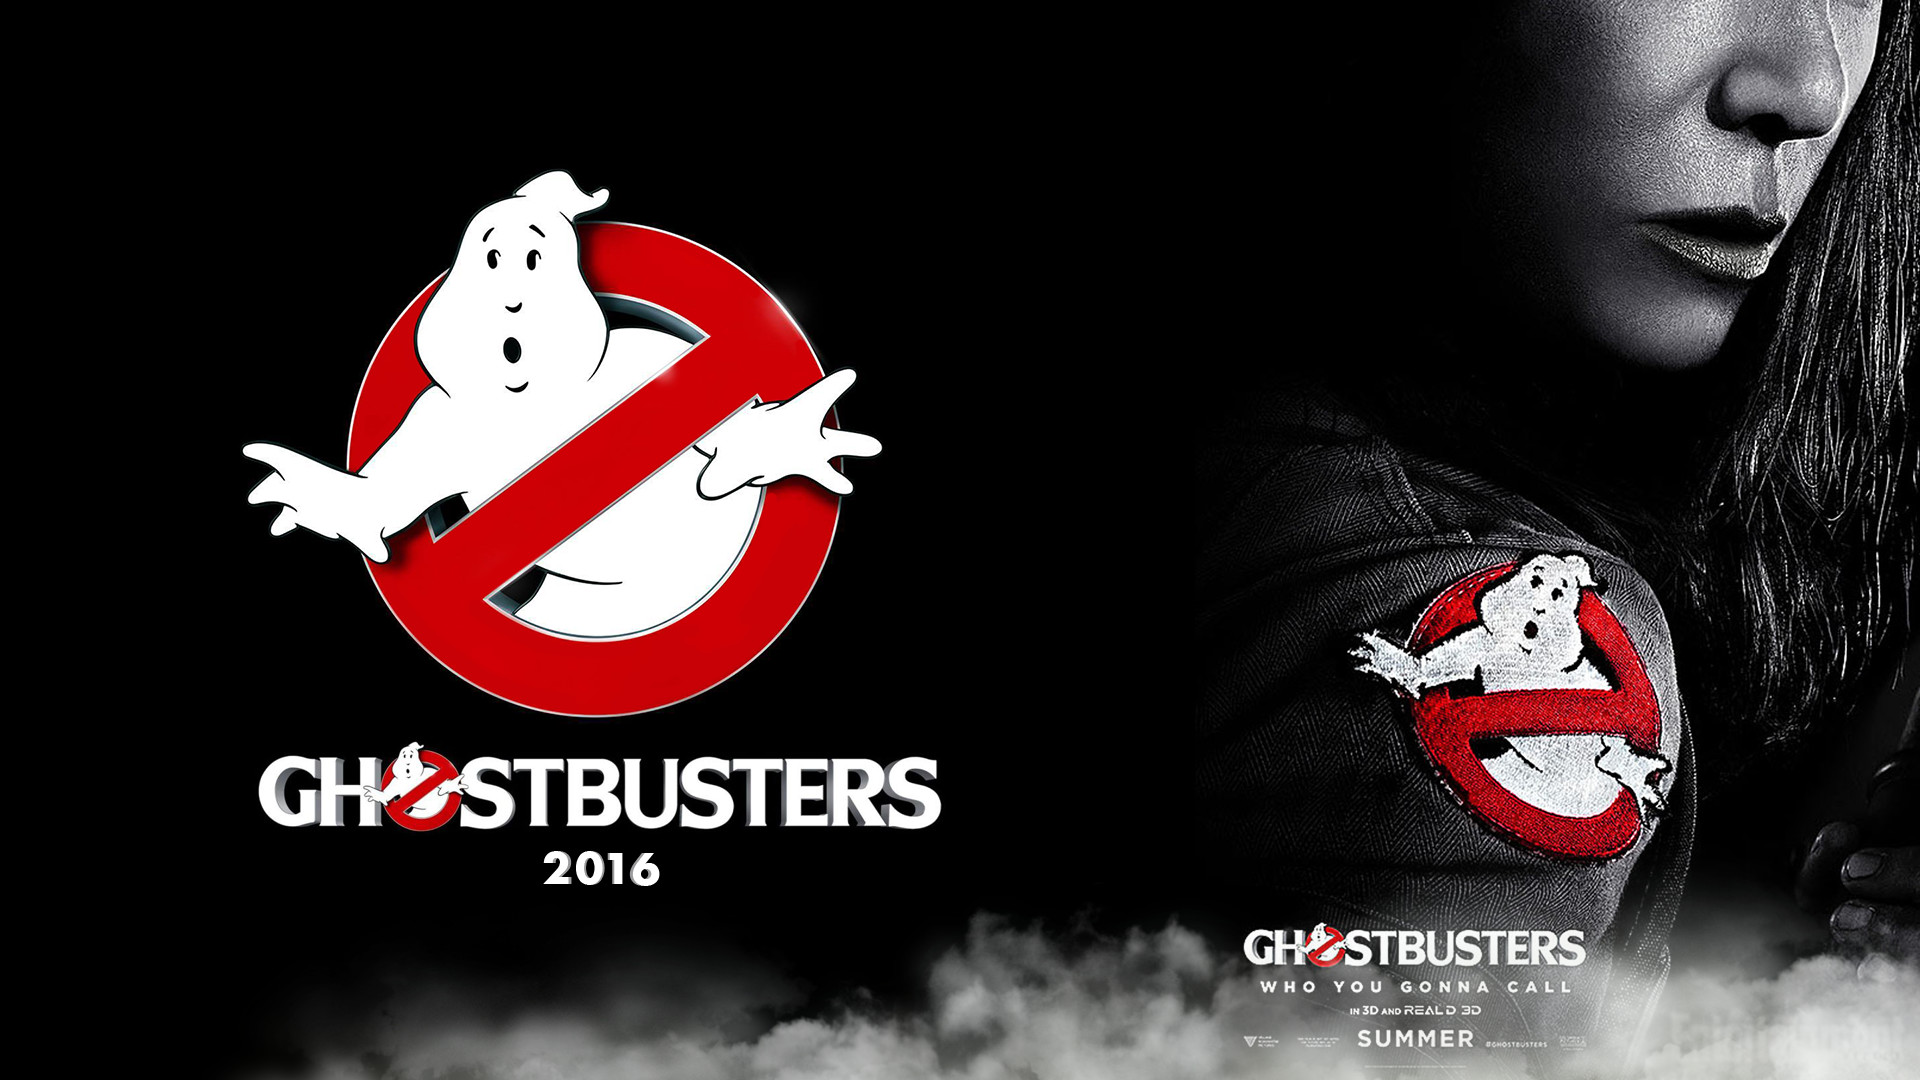 1920x1080 ... ghostbusters_2016_wallpaper_erin_gilbert_by_jhroberts-d9l82u4  ghostbusters_poster_by_danieleredrossini-d7pl1im  ghostbusters_wallpaper_by_spazchicken ...